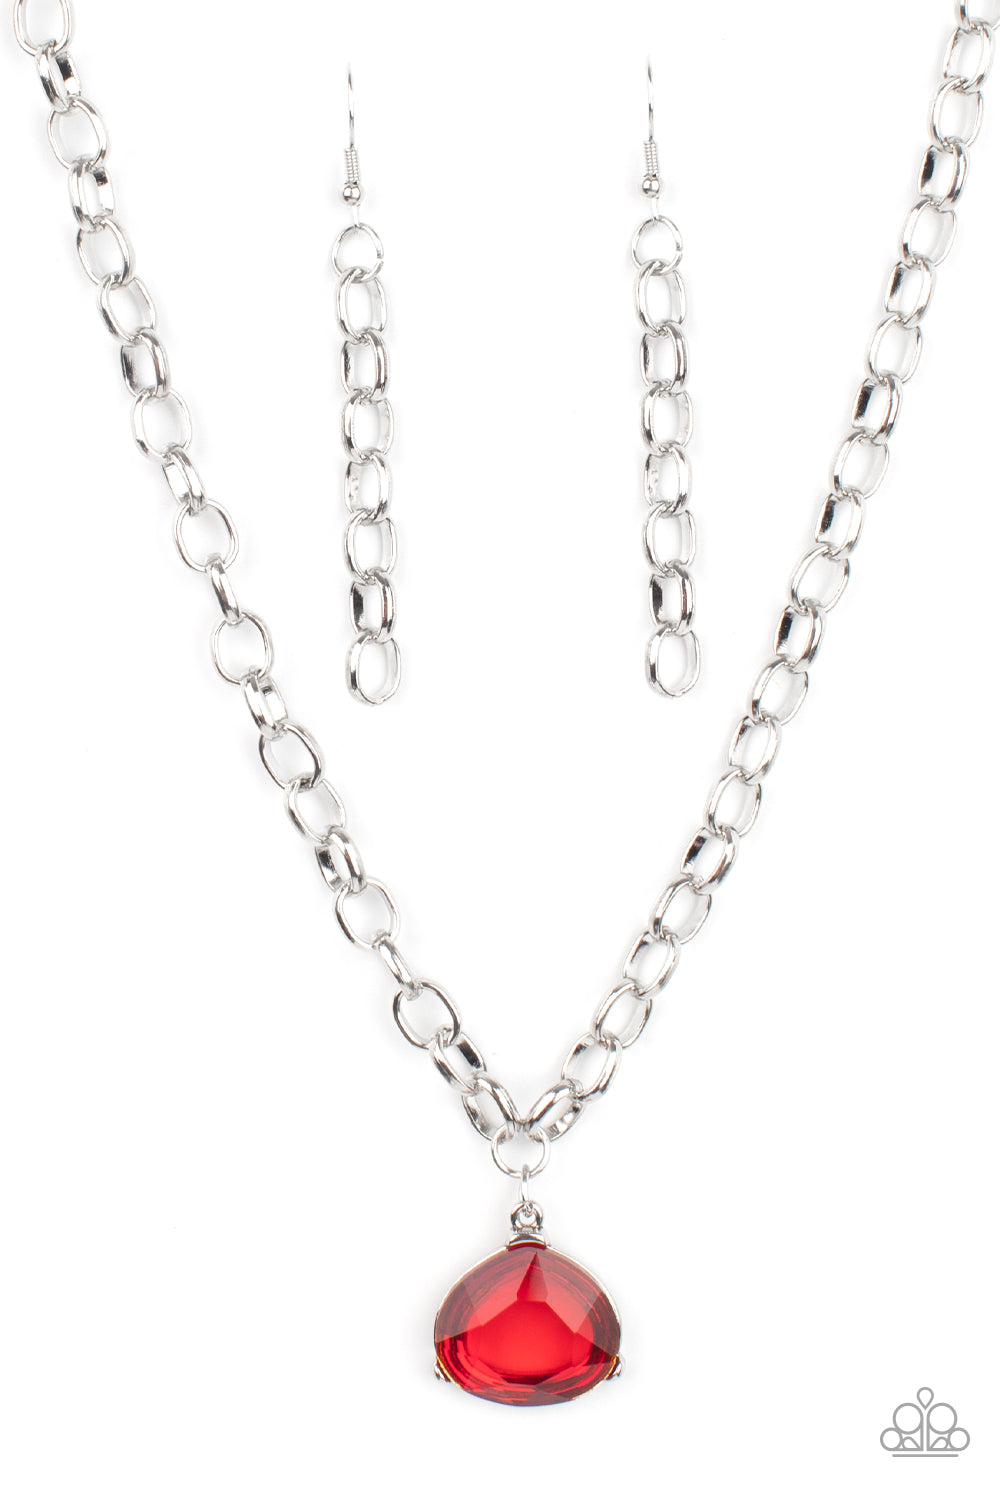 Gallery Gem - Red Paparazzi Necklace